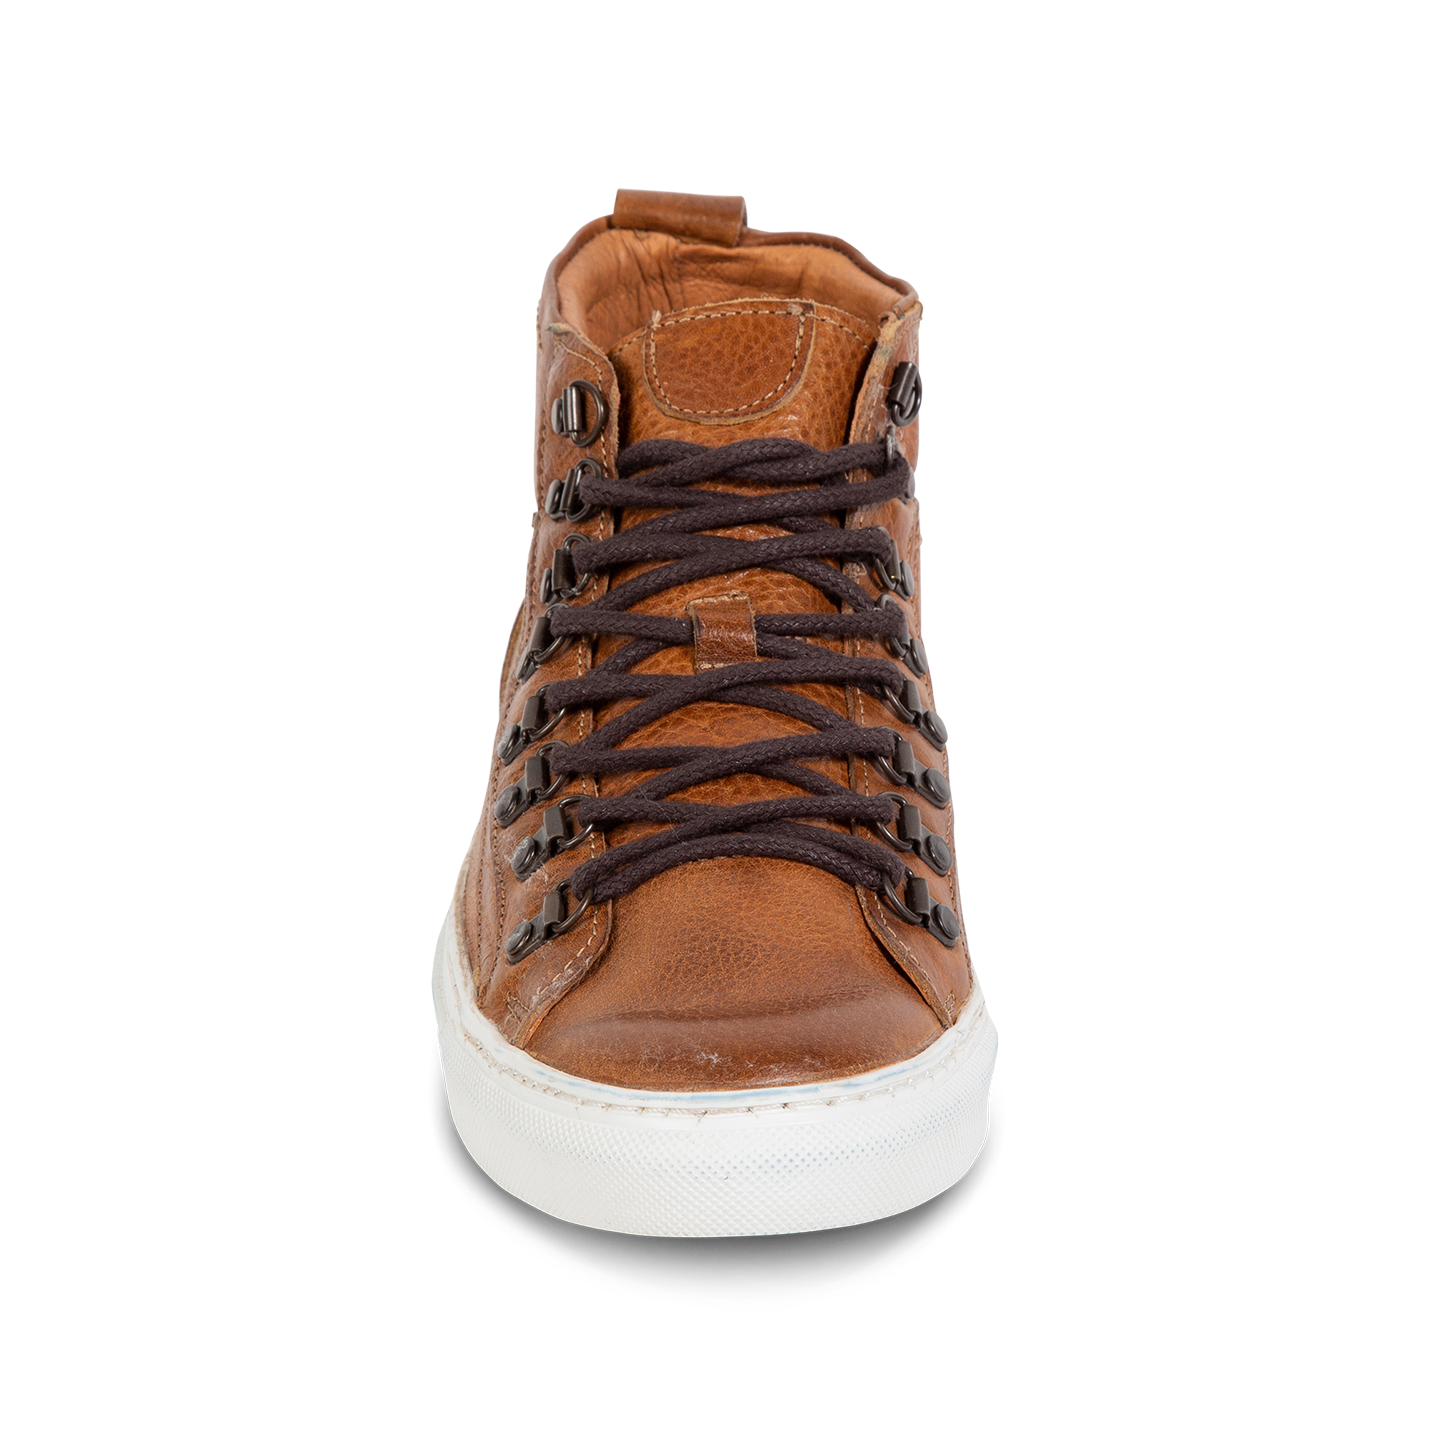 Front view showing adjustable lacing with brass hardware and leather tongue on FREEBIRD men's Shelby cognac shoe